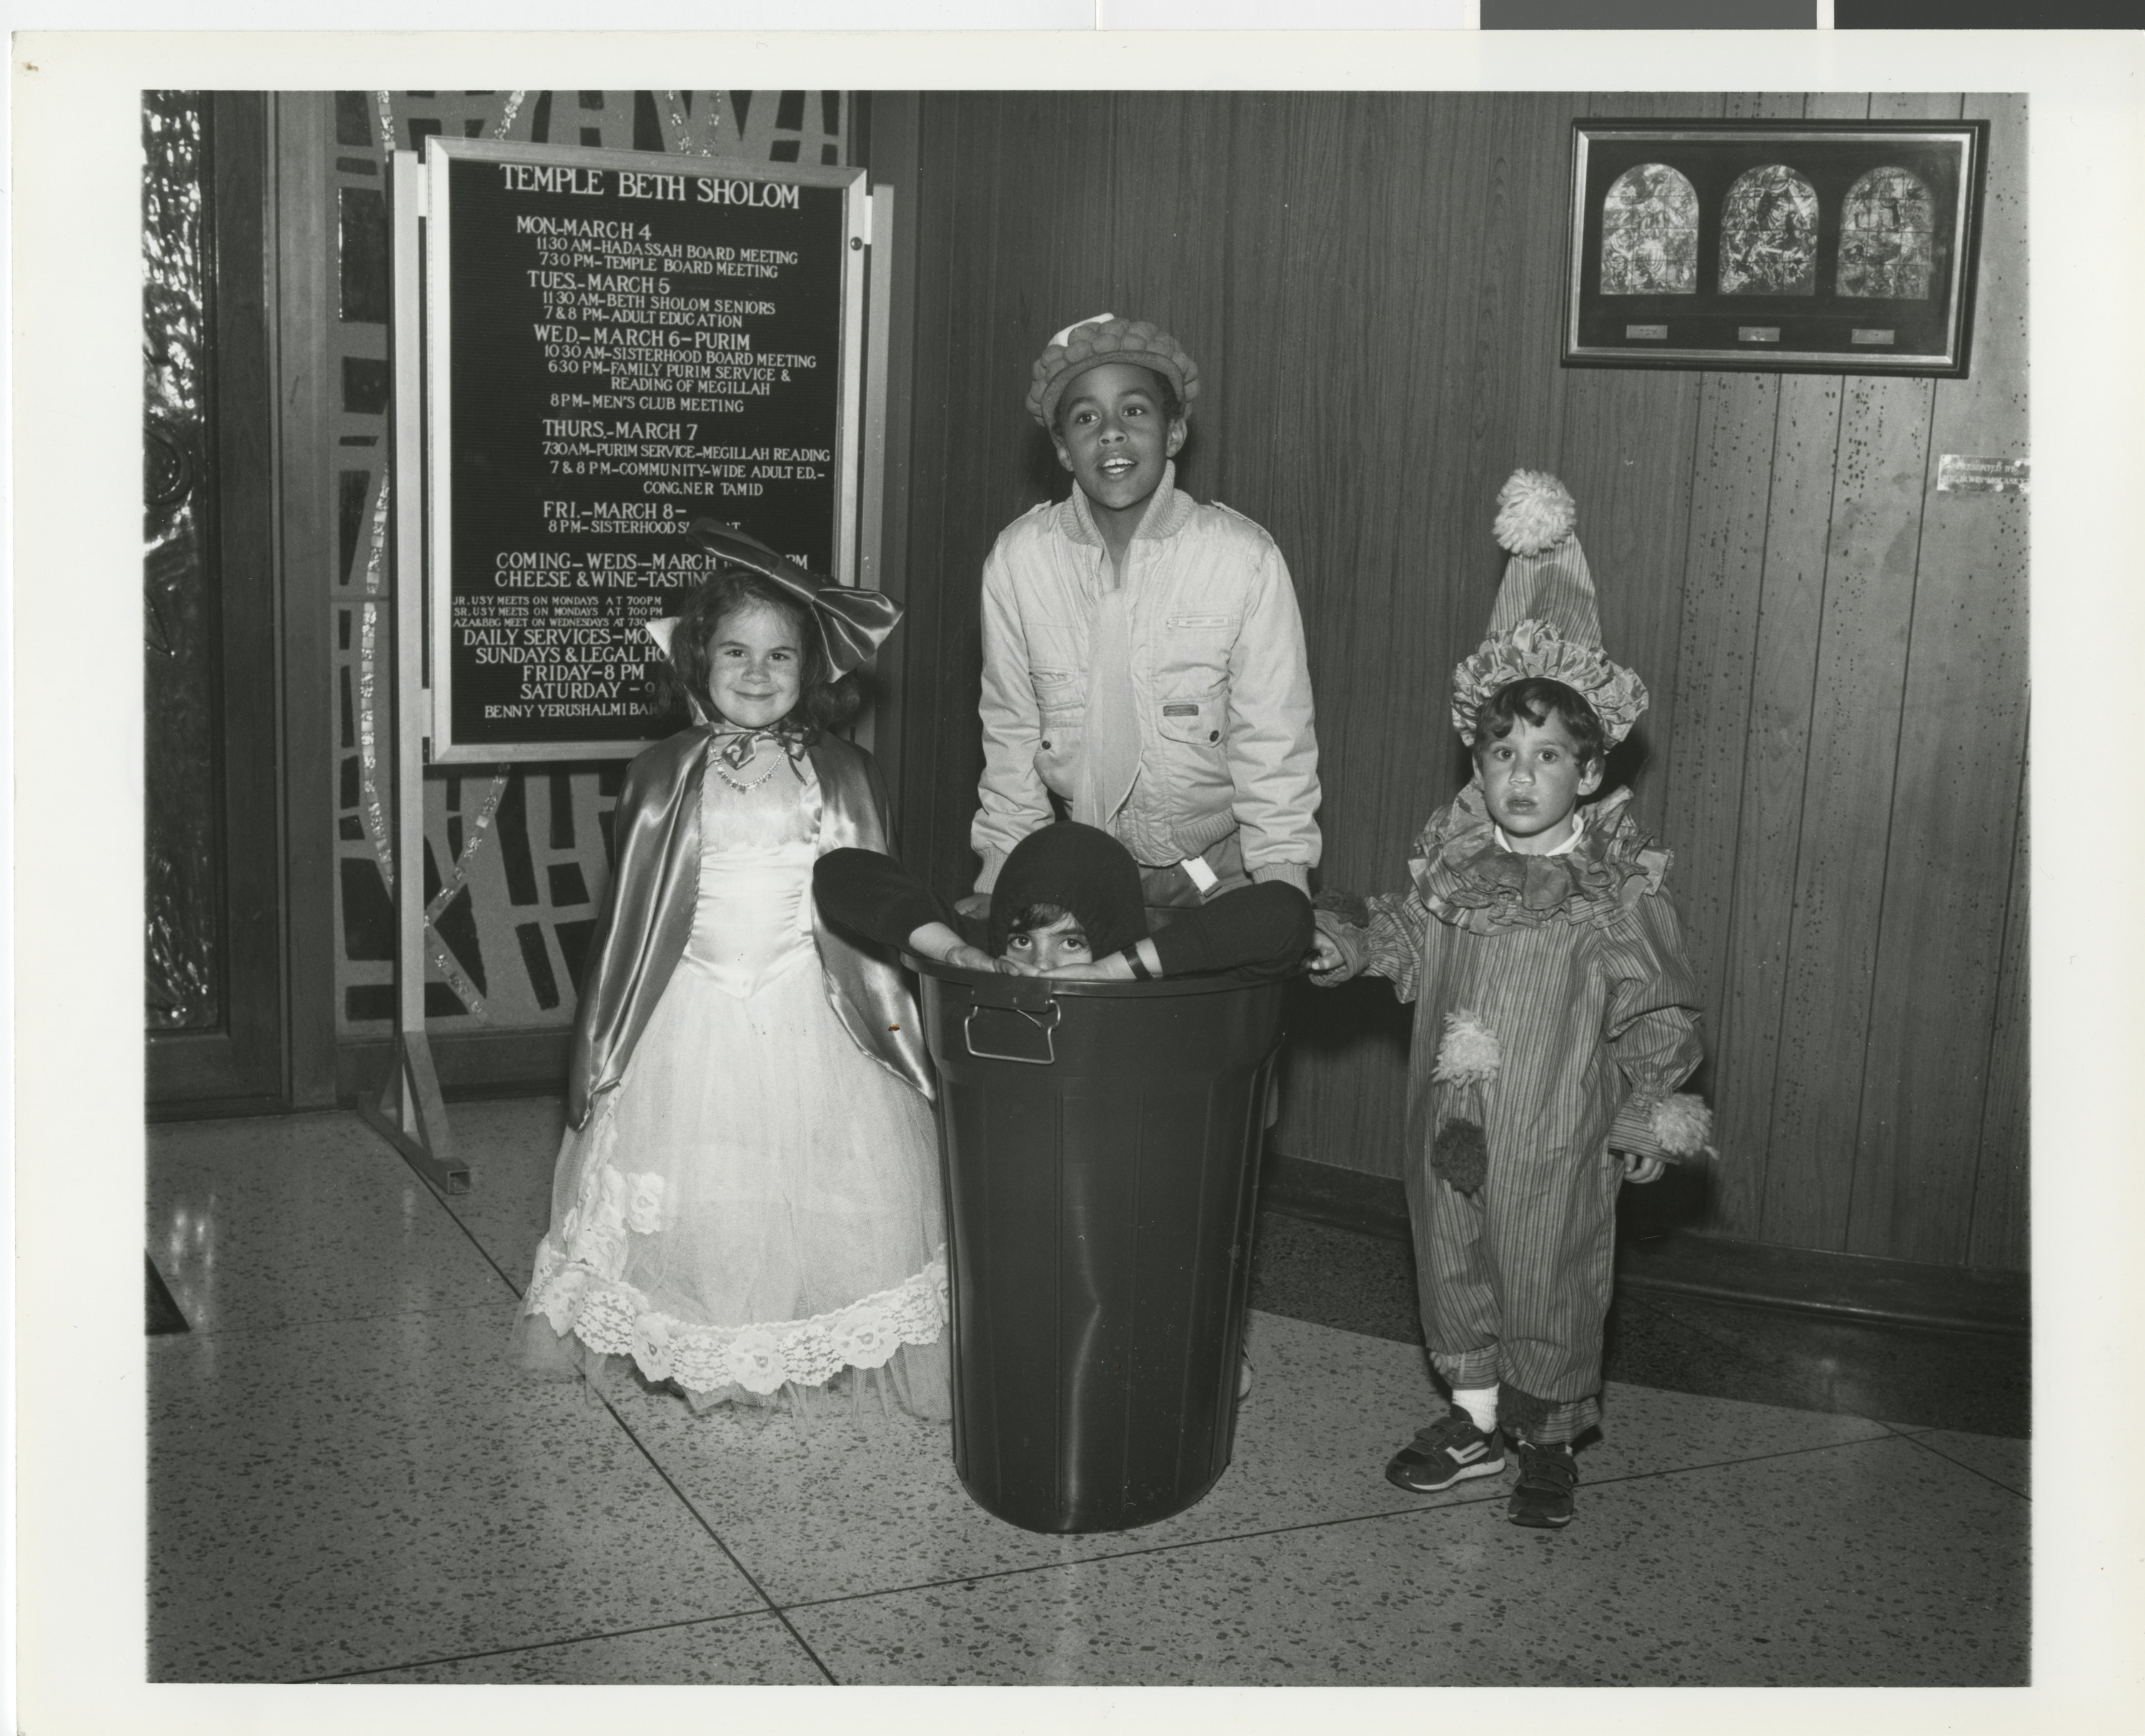 Photograph of children during Purim event at Temple Beth Sholom, 1980s